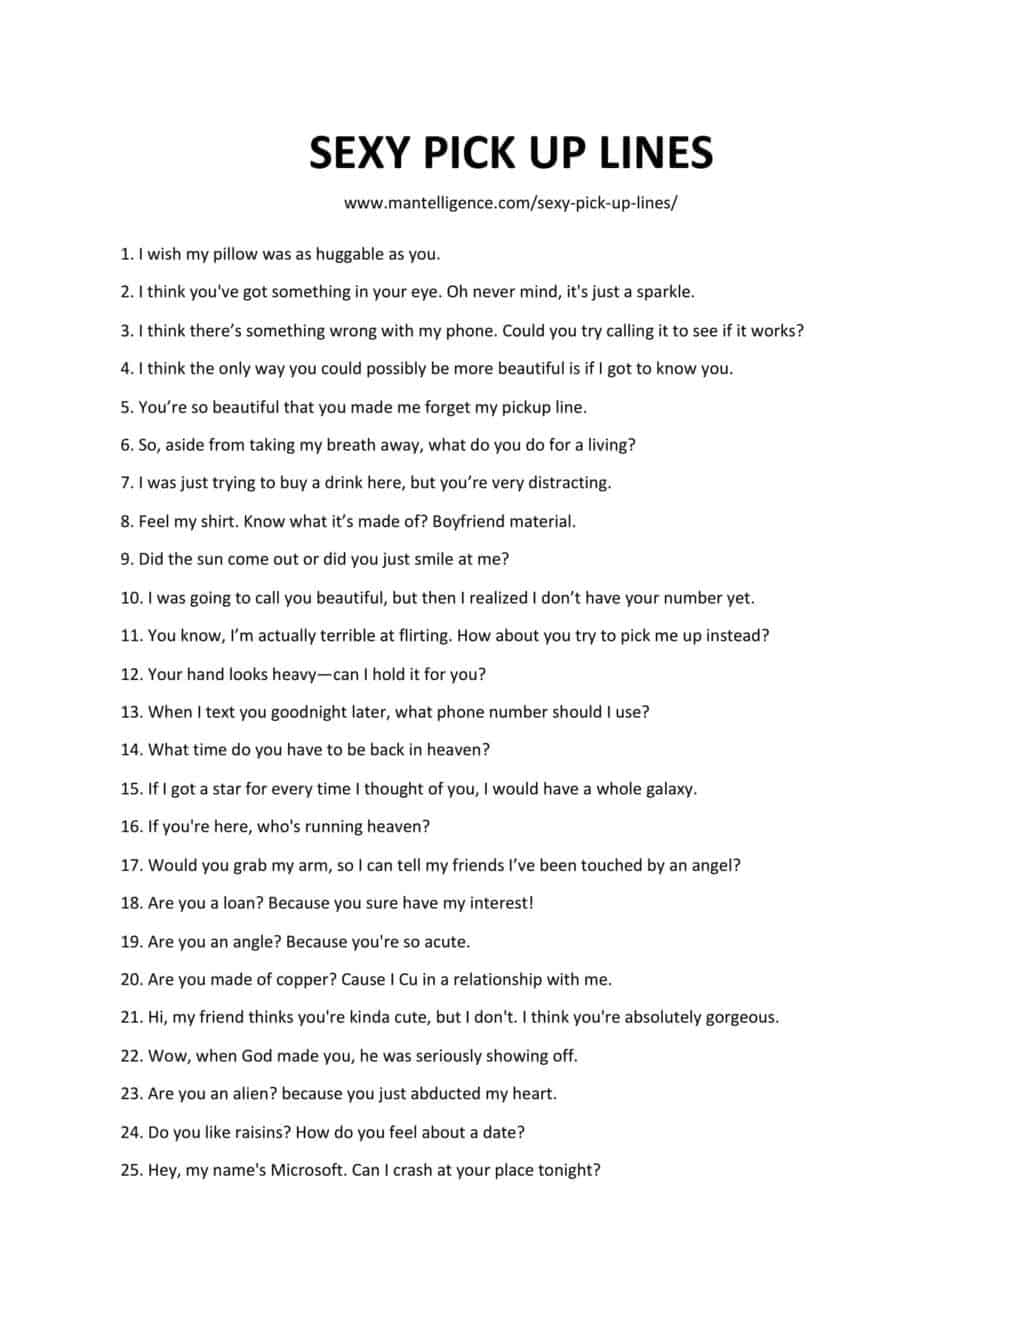 Flirty lines to say to a guy